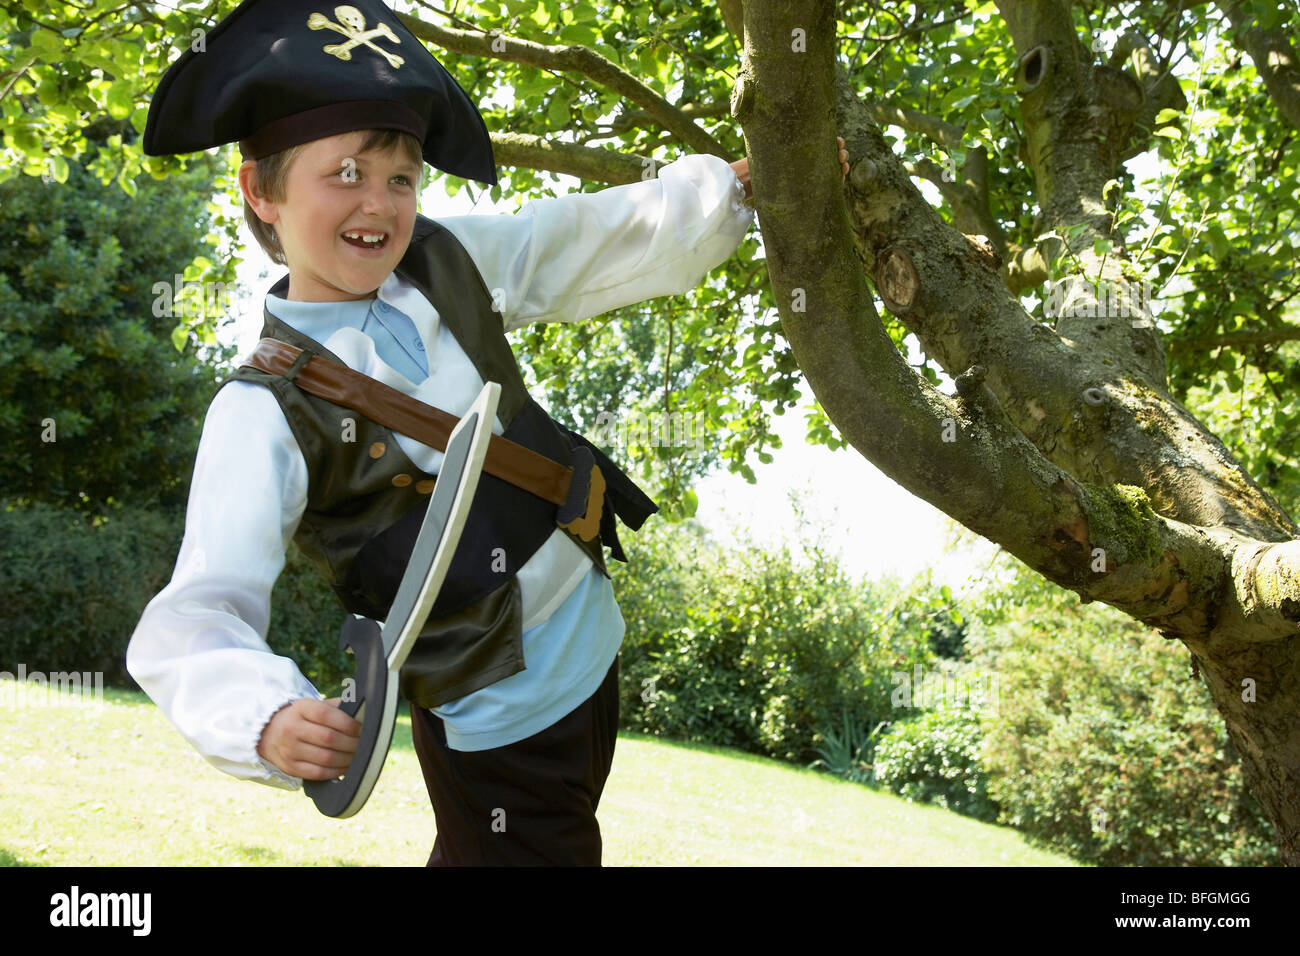 Boy Wearing Pirate Costume swinging from tree in park Stock Photo